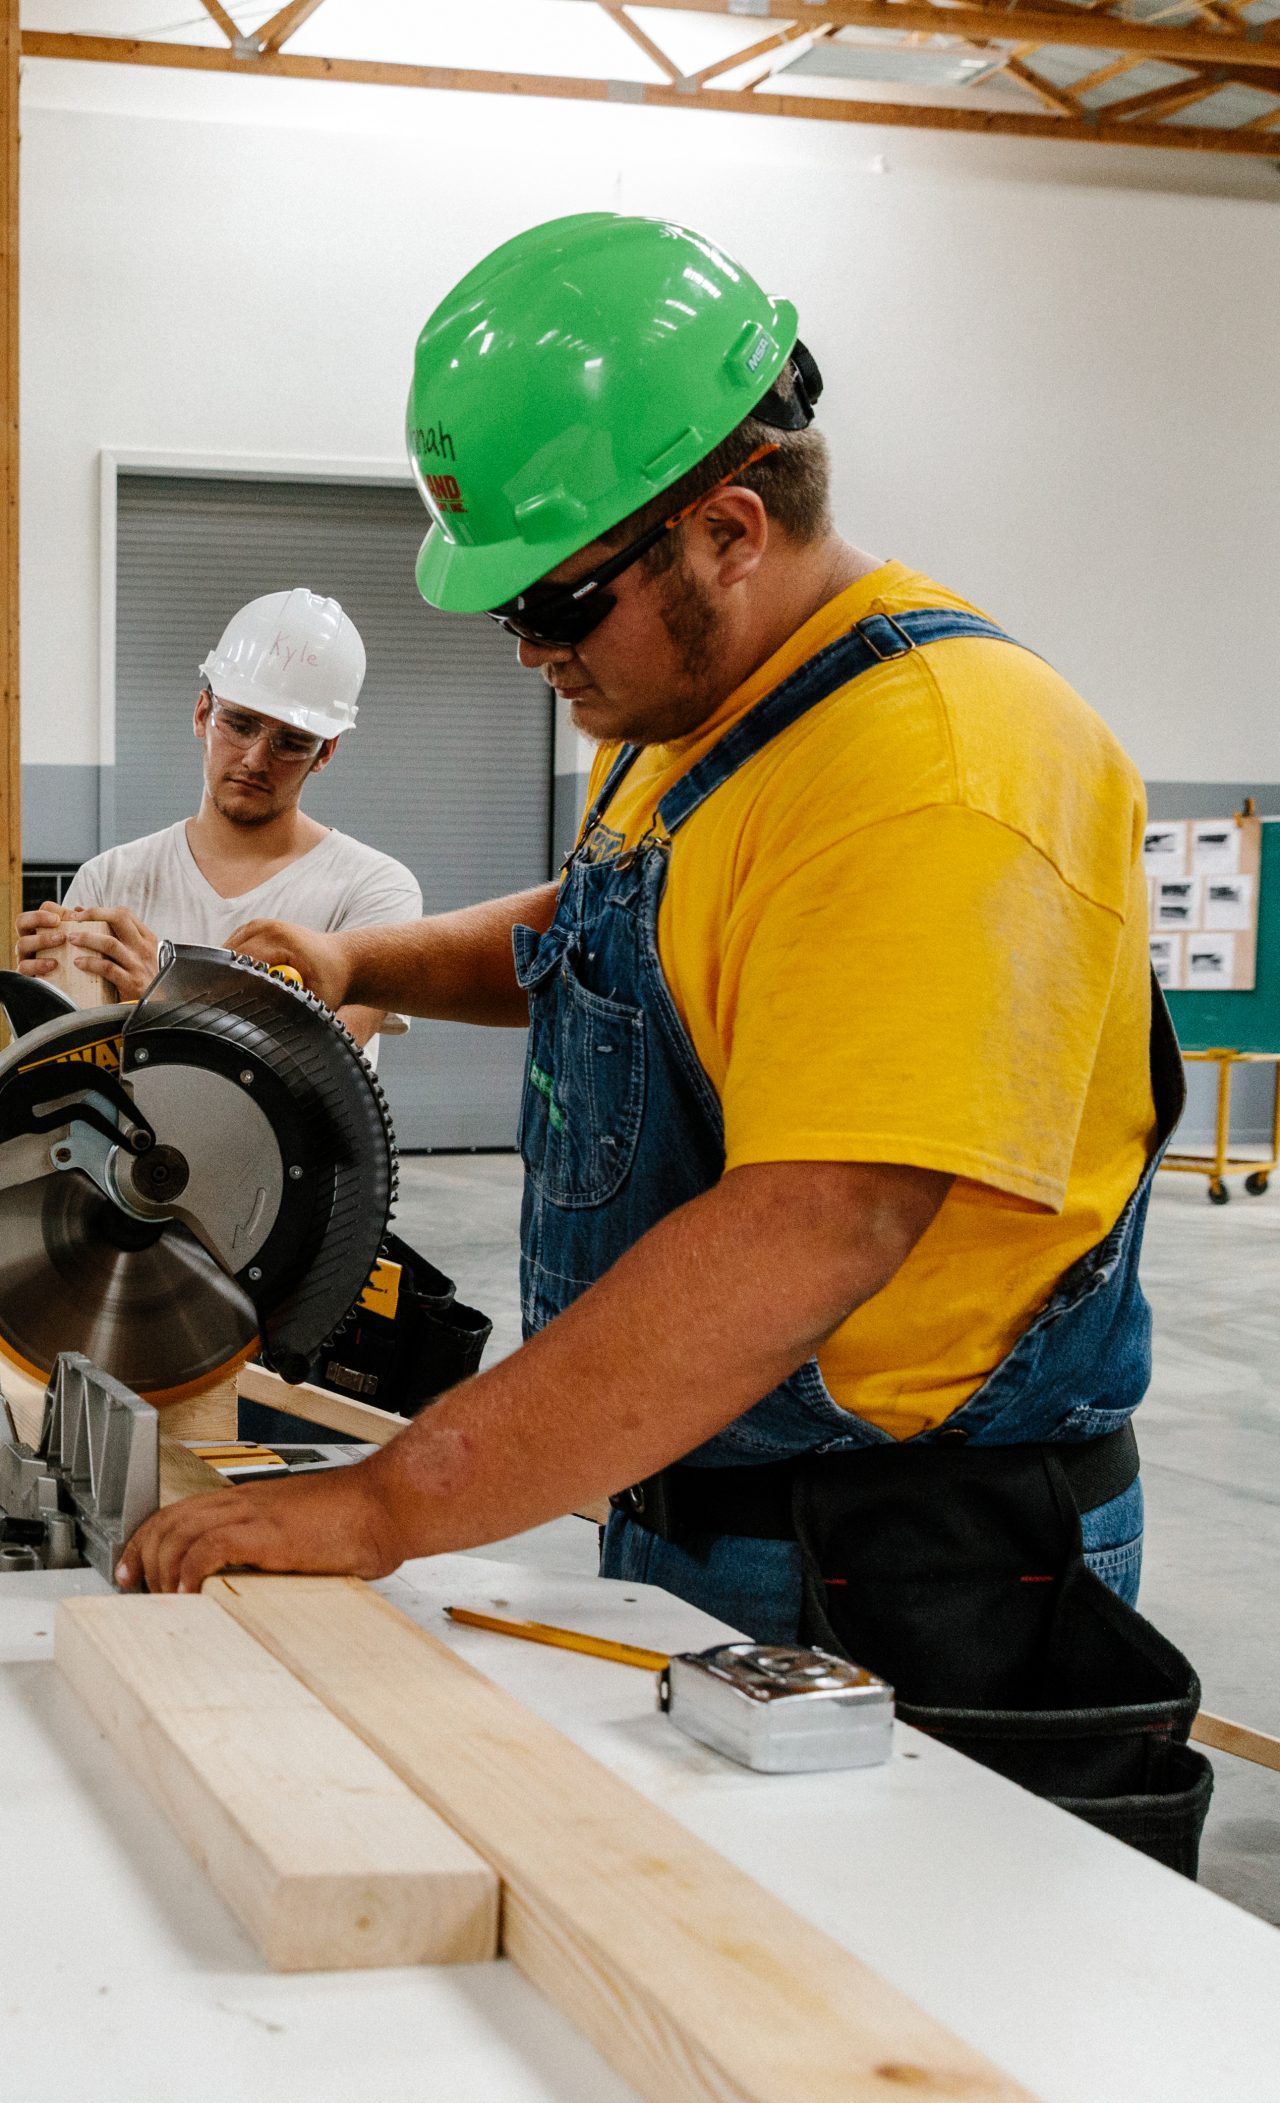 La Harpe, KS - July 31, 2017 - Christian Jackson (17) and Kiefer Endicott work at the Regional Technology Center, established by Ray Maloney and winner of the 2016 Thrive Allen County award for community excellence.